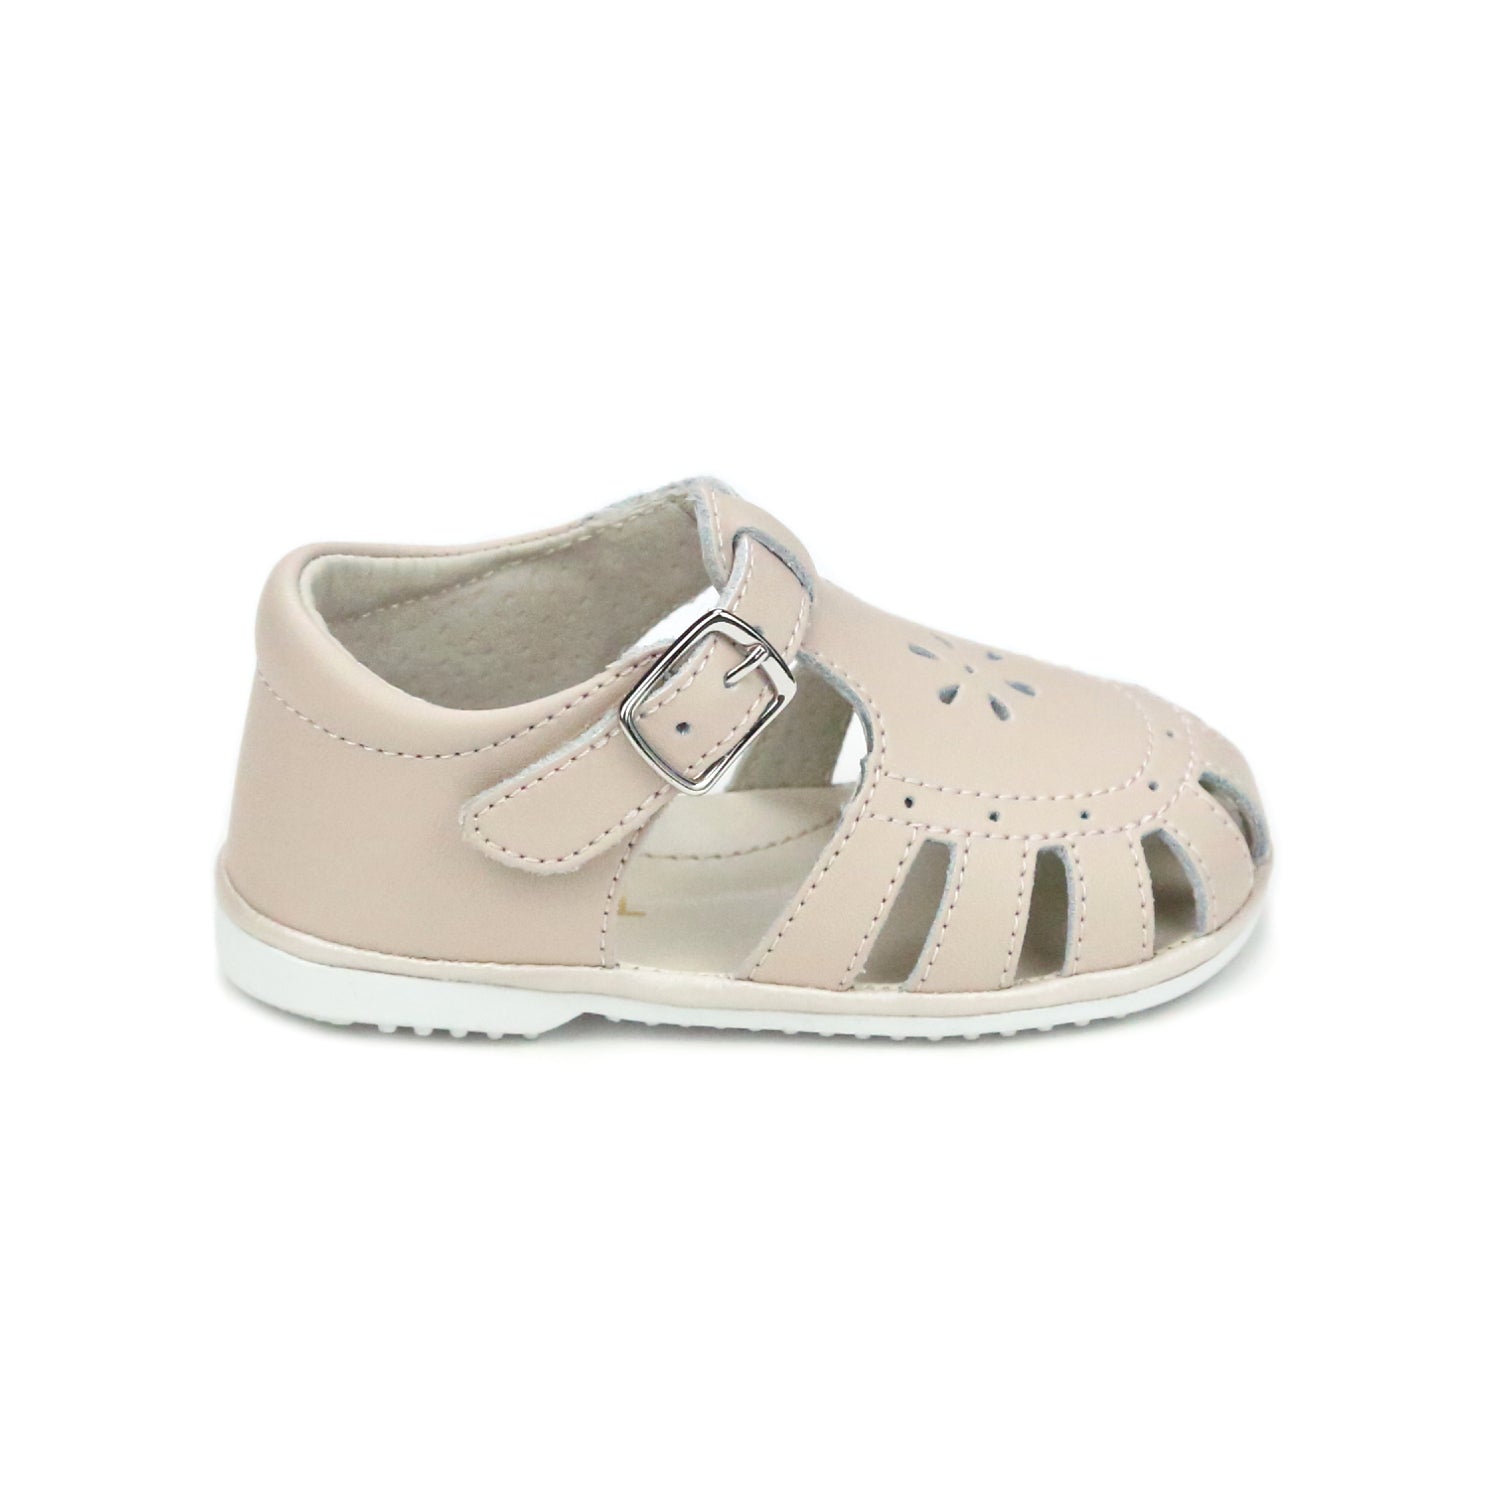 Shelby Caged Sandal - Babies & Toddlers